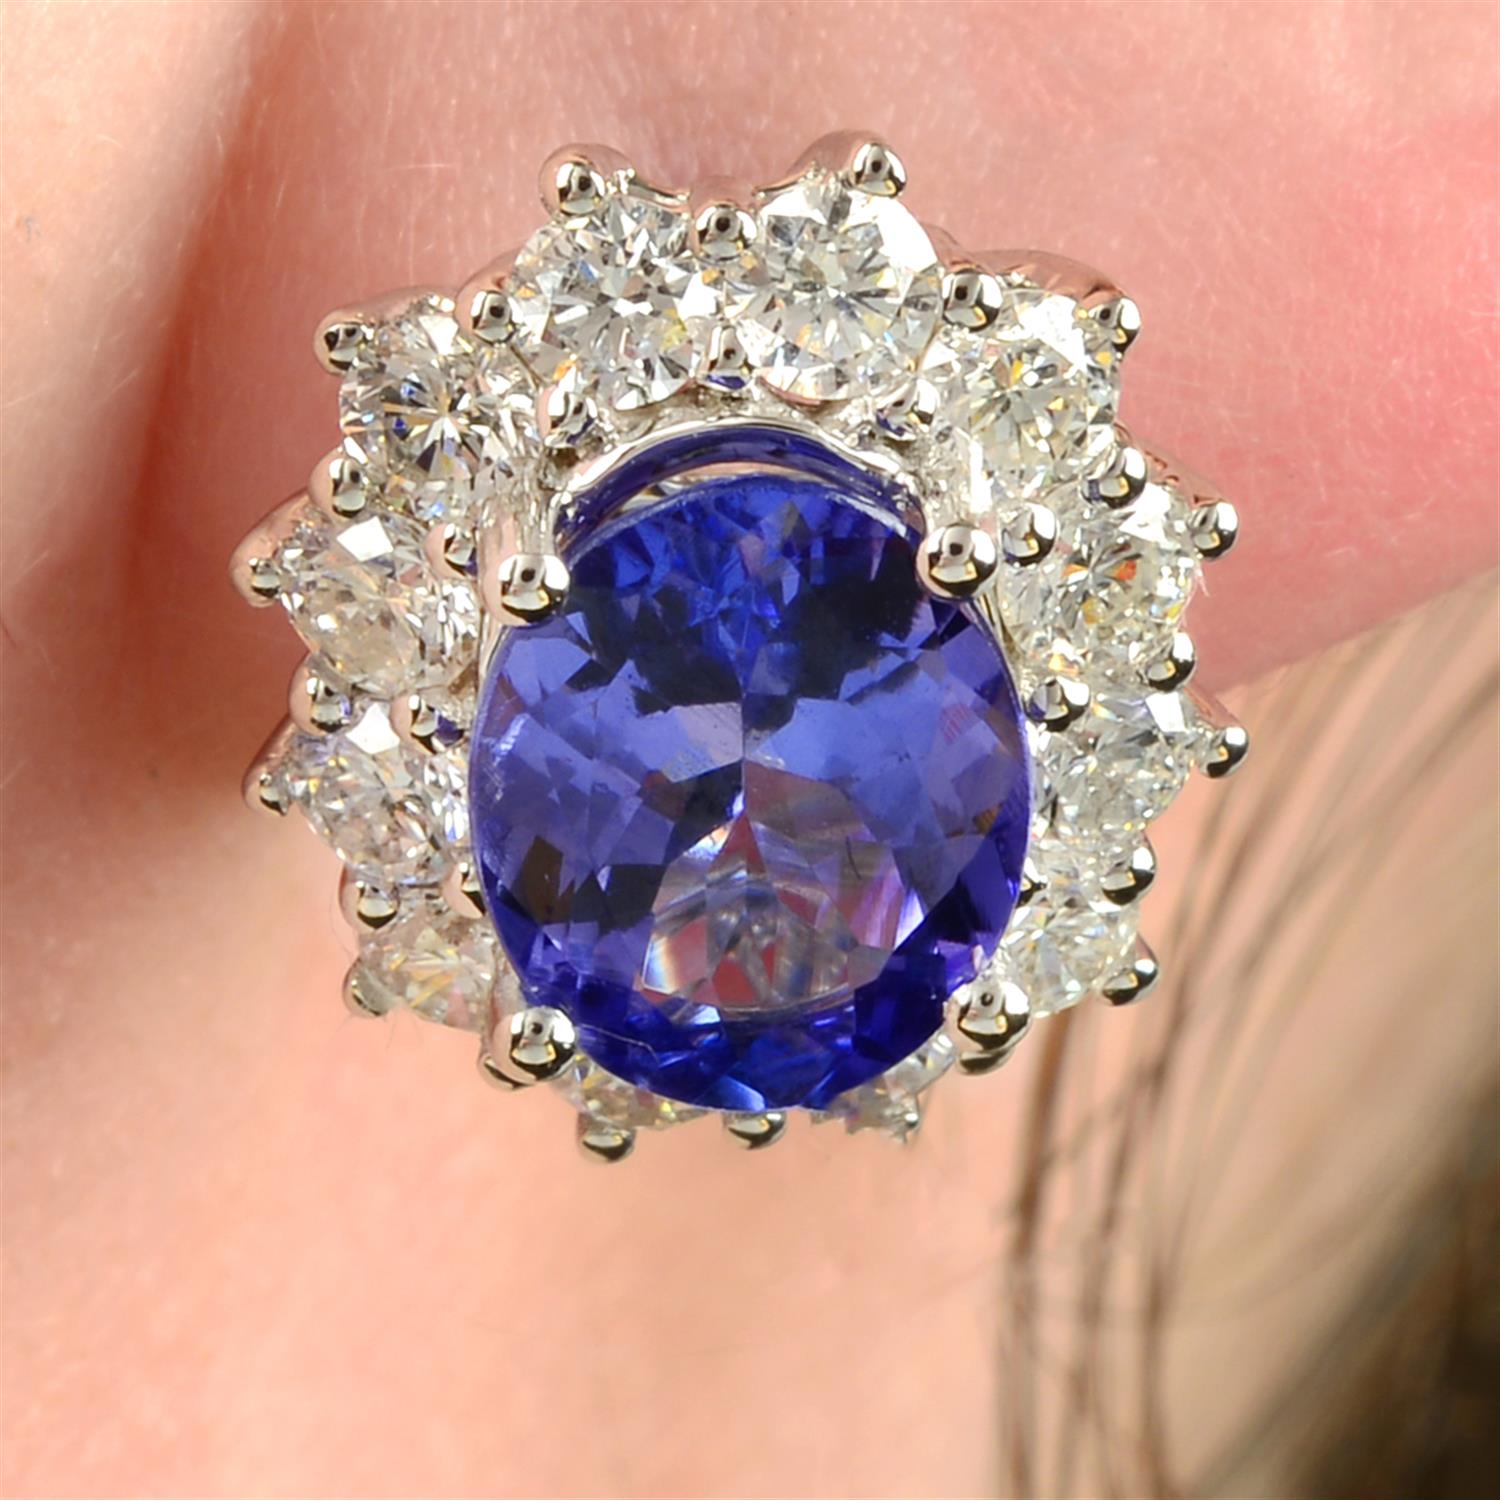 A pair of 18ct gold tanzanite and brilliant-cut diamond cluster earrings.